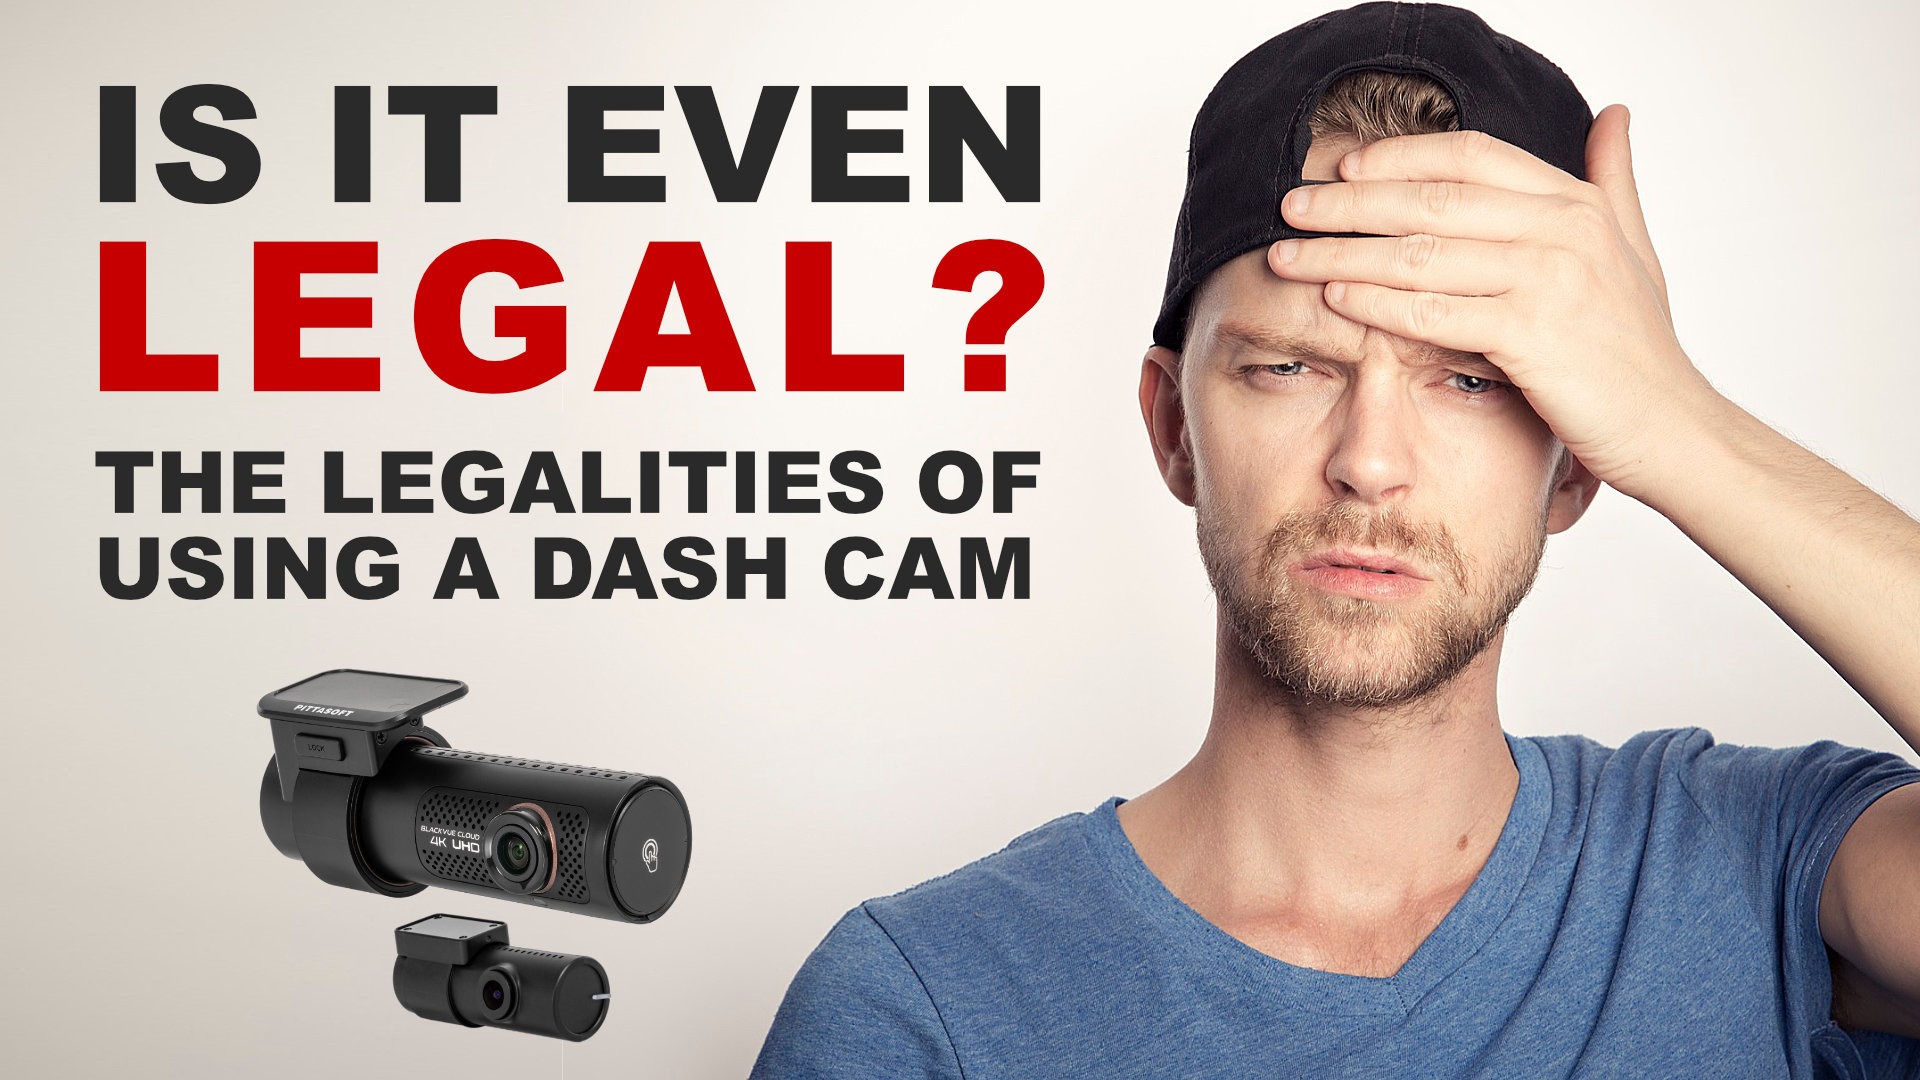 Is it even legal? The legalities of using a dash cam. What you need to know.